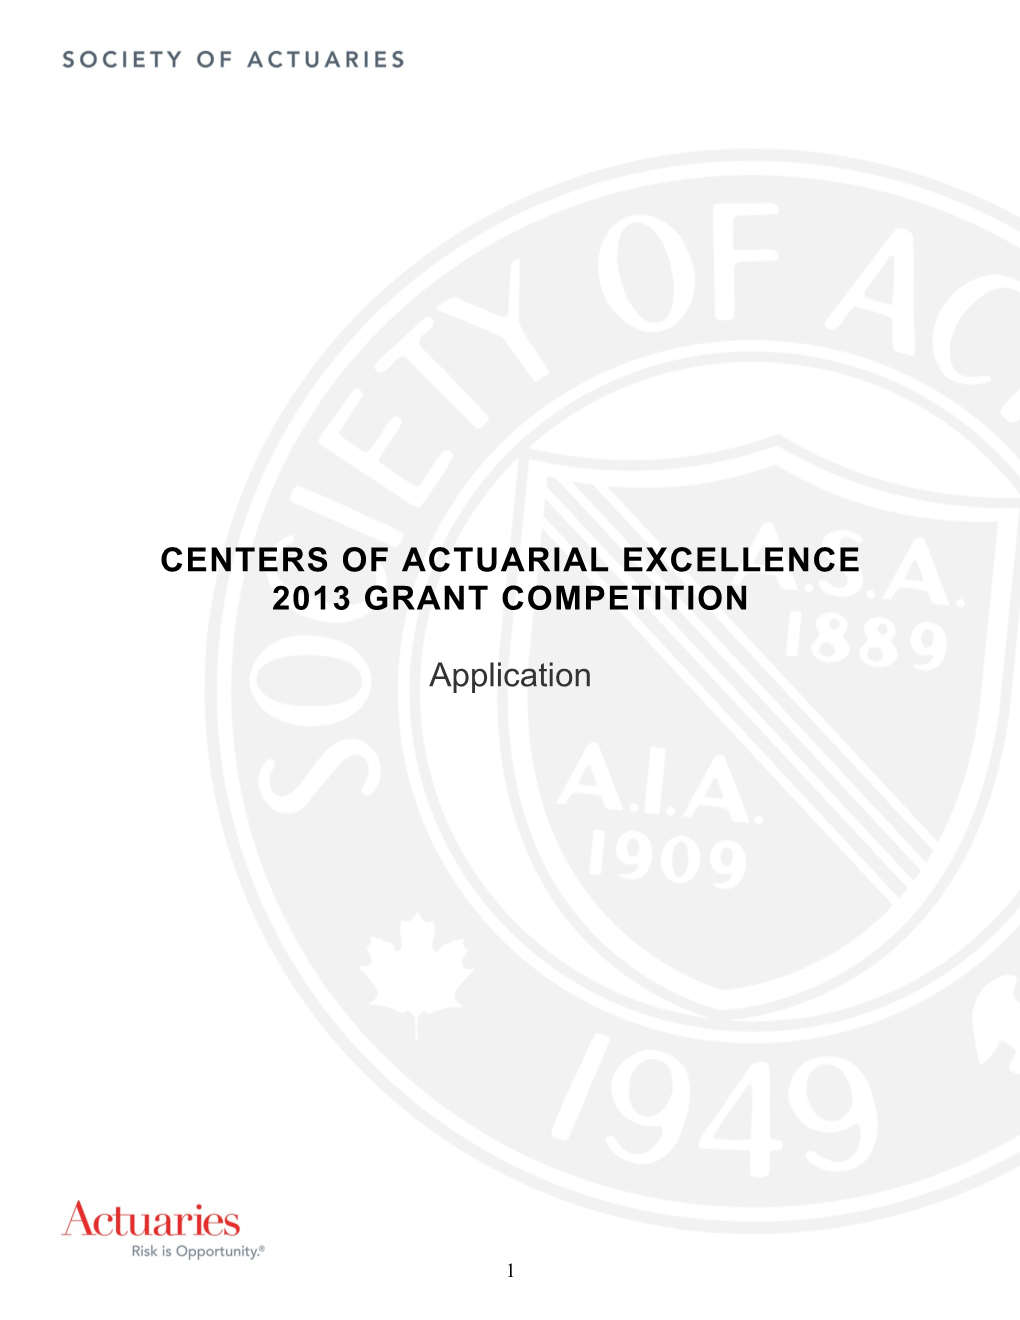 Center of Actuarial Excellence Application Form